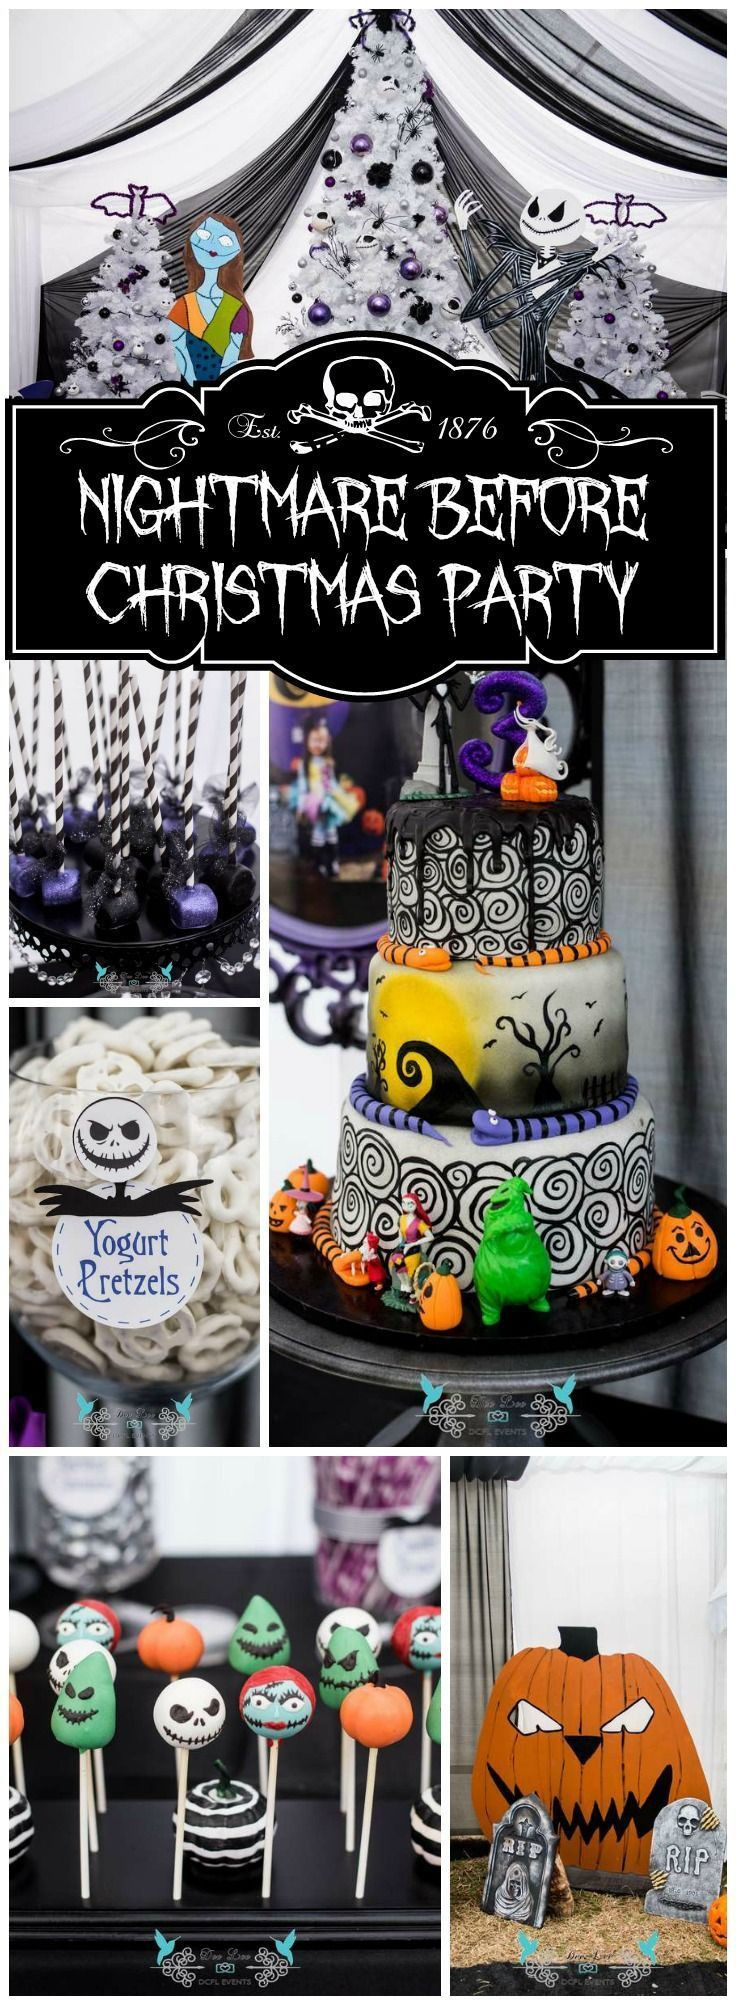 Nightmare Before Christmas Baby Shower Party Ideas
 Love this amazing Nightmare Before Christmas birthday